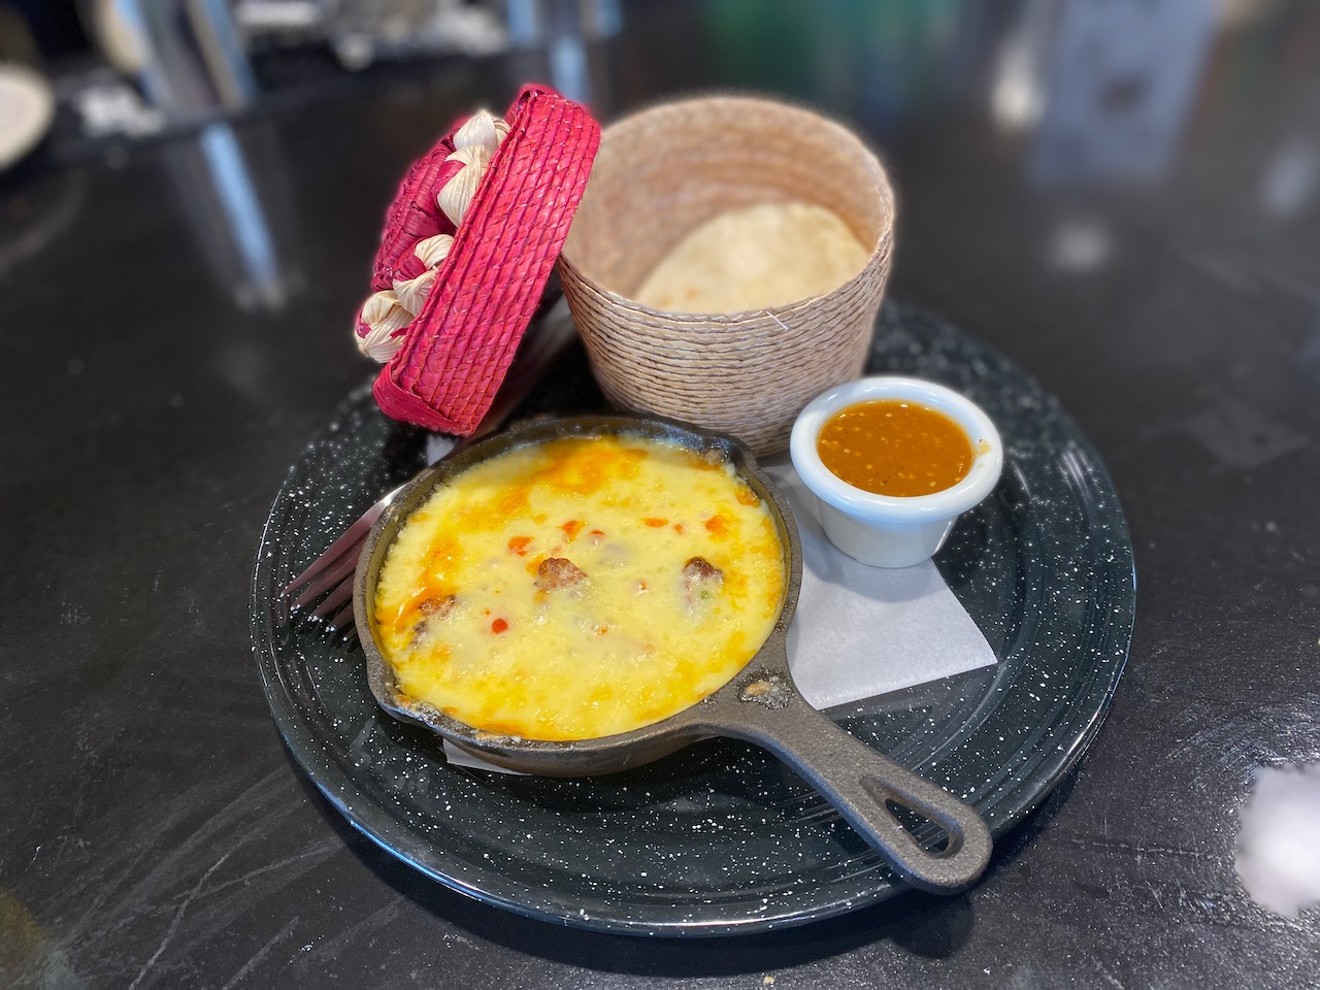 Queso fundido is literally a job requirement.